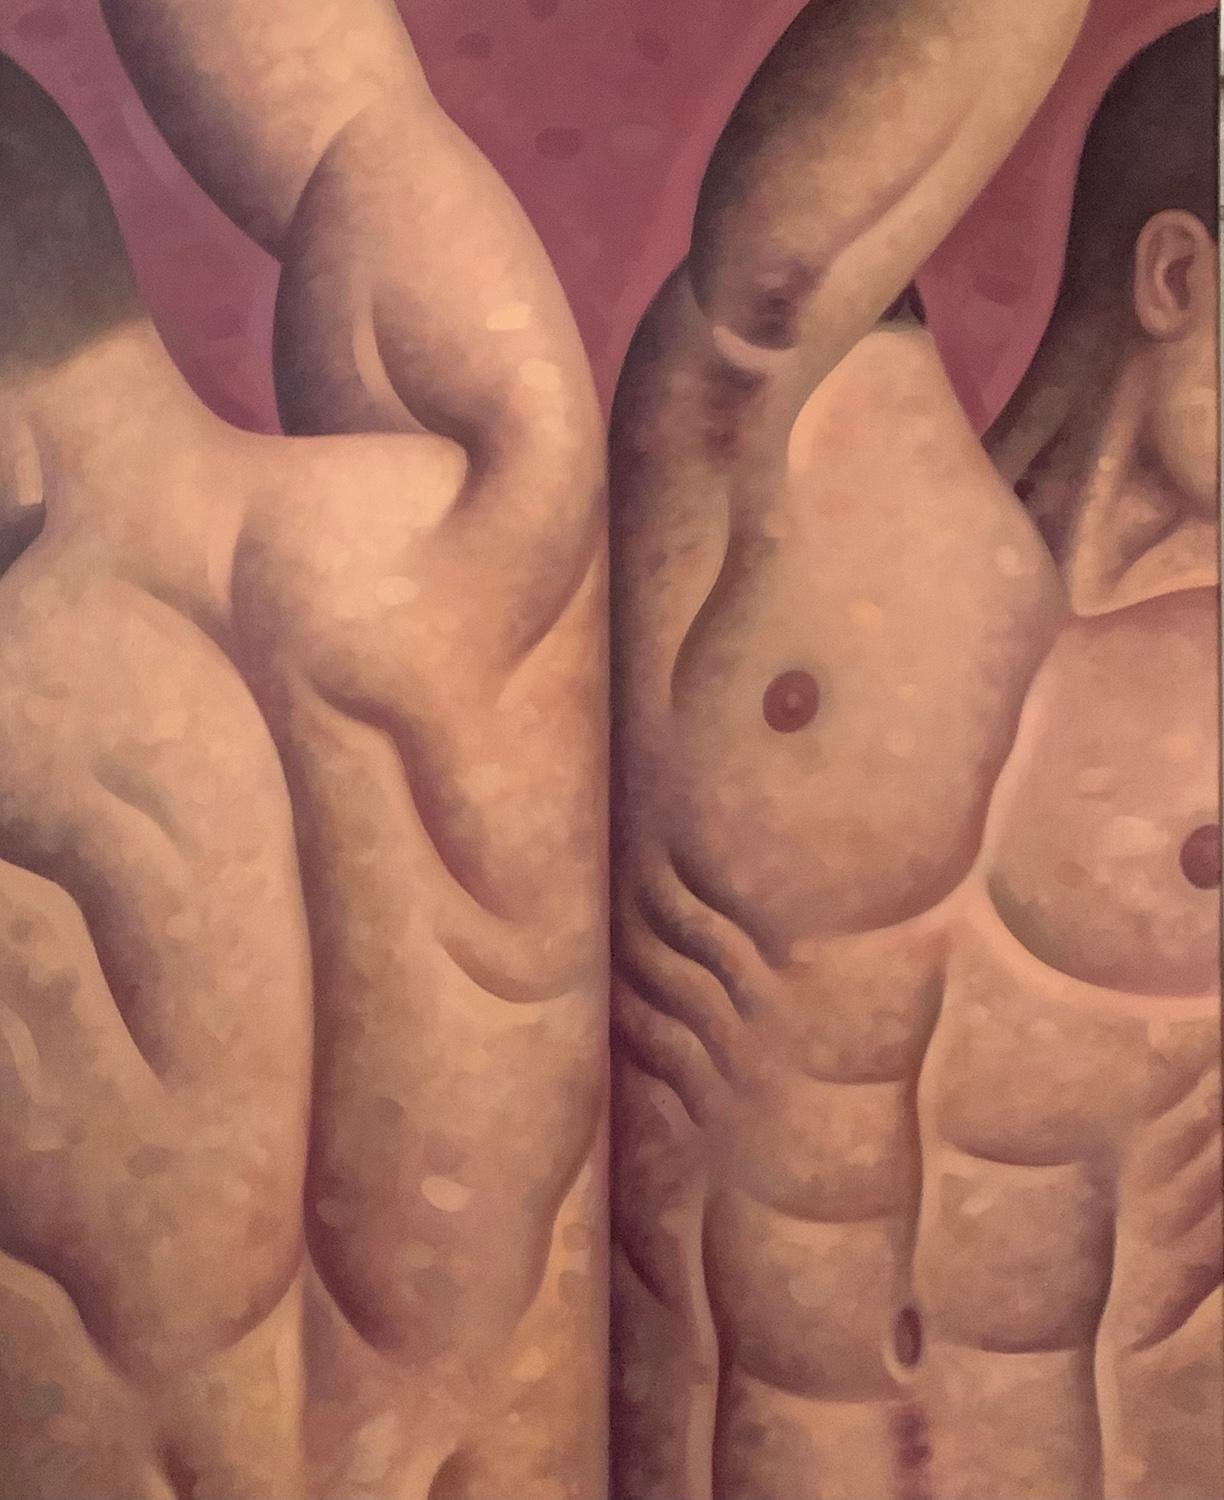 Anatomy Lesson, No. 57, 2024 (modern oil painting of two closely cropped nude male figures against red background)
oil on linen
30 x 24 inches
31 x 25 x 2 inches with a black floater frame
wire backing
signed and in excellent condition 

This